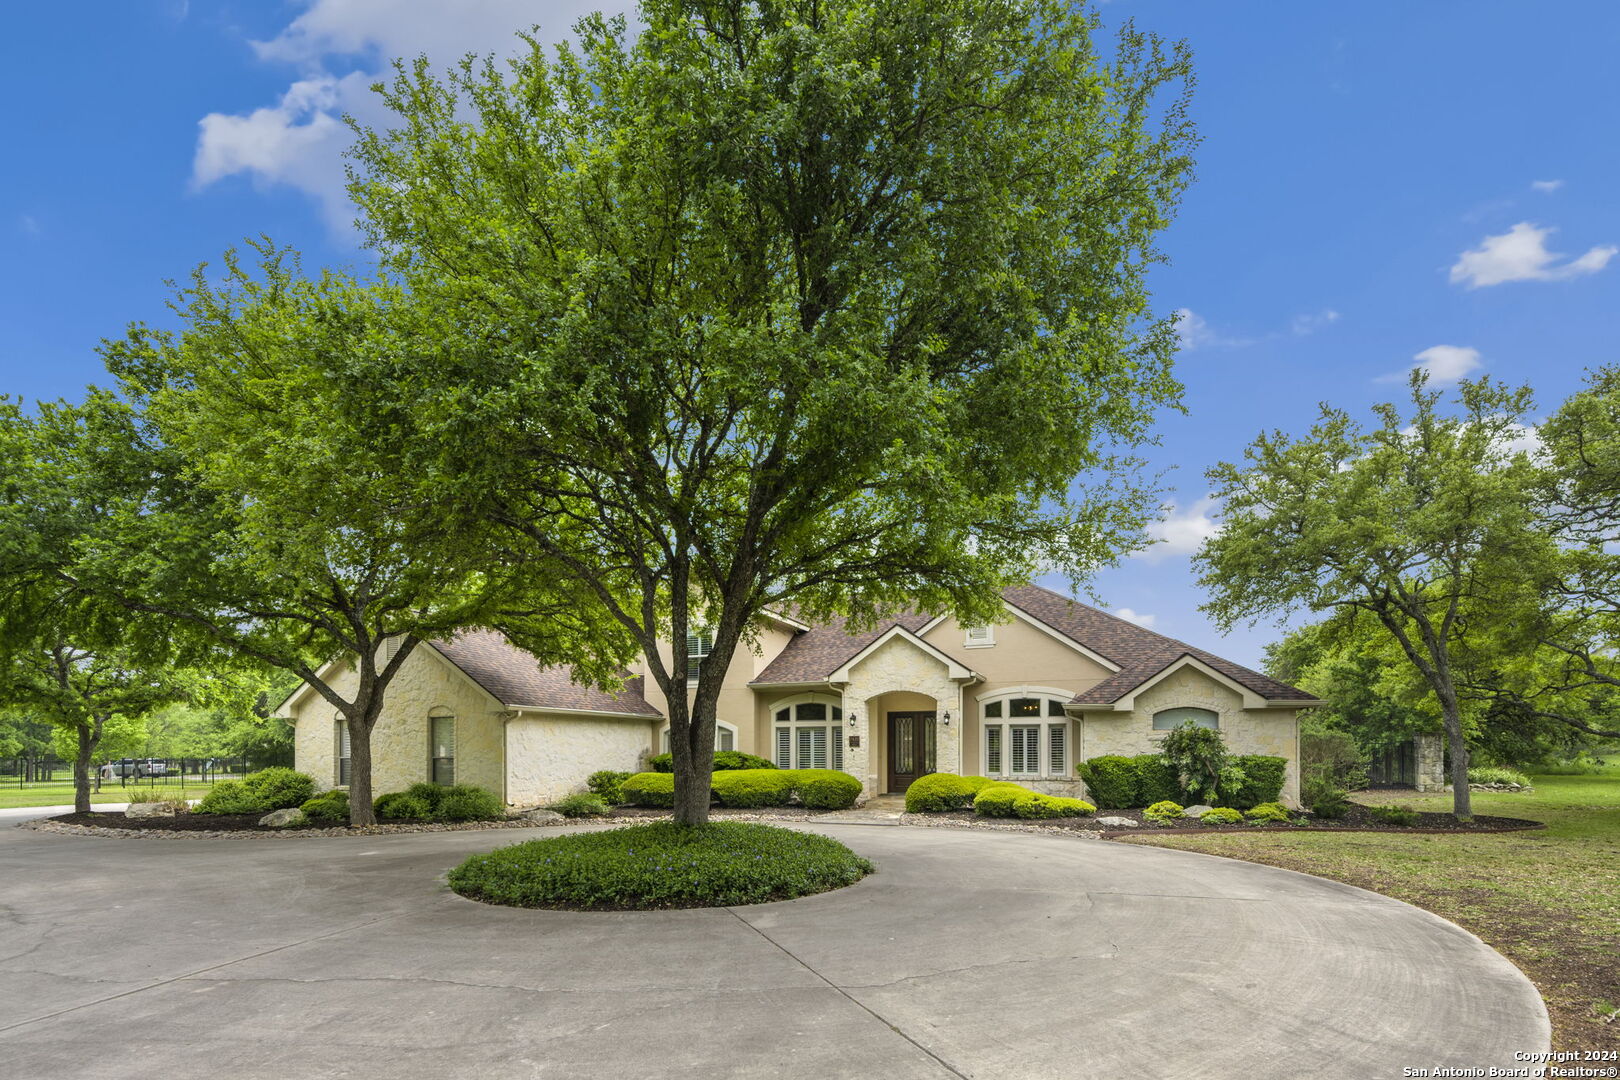 Photo of 7430 Keeneland Dr in Boerne, TX